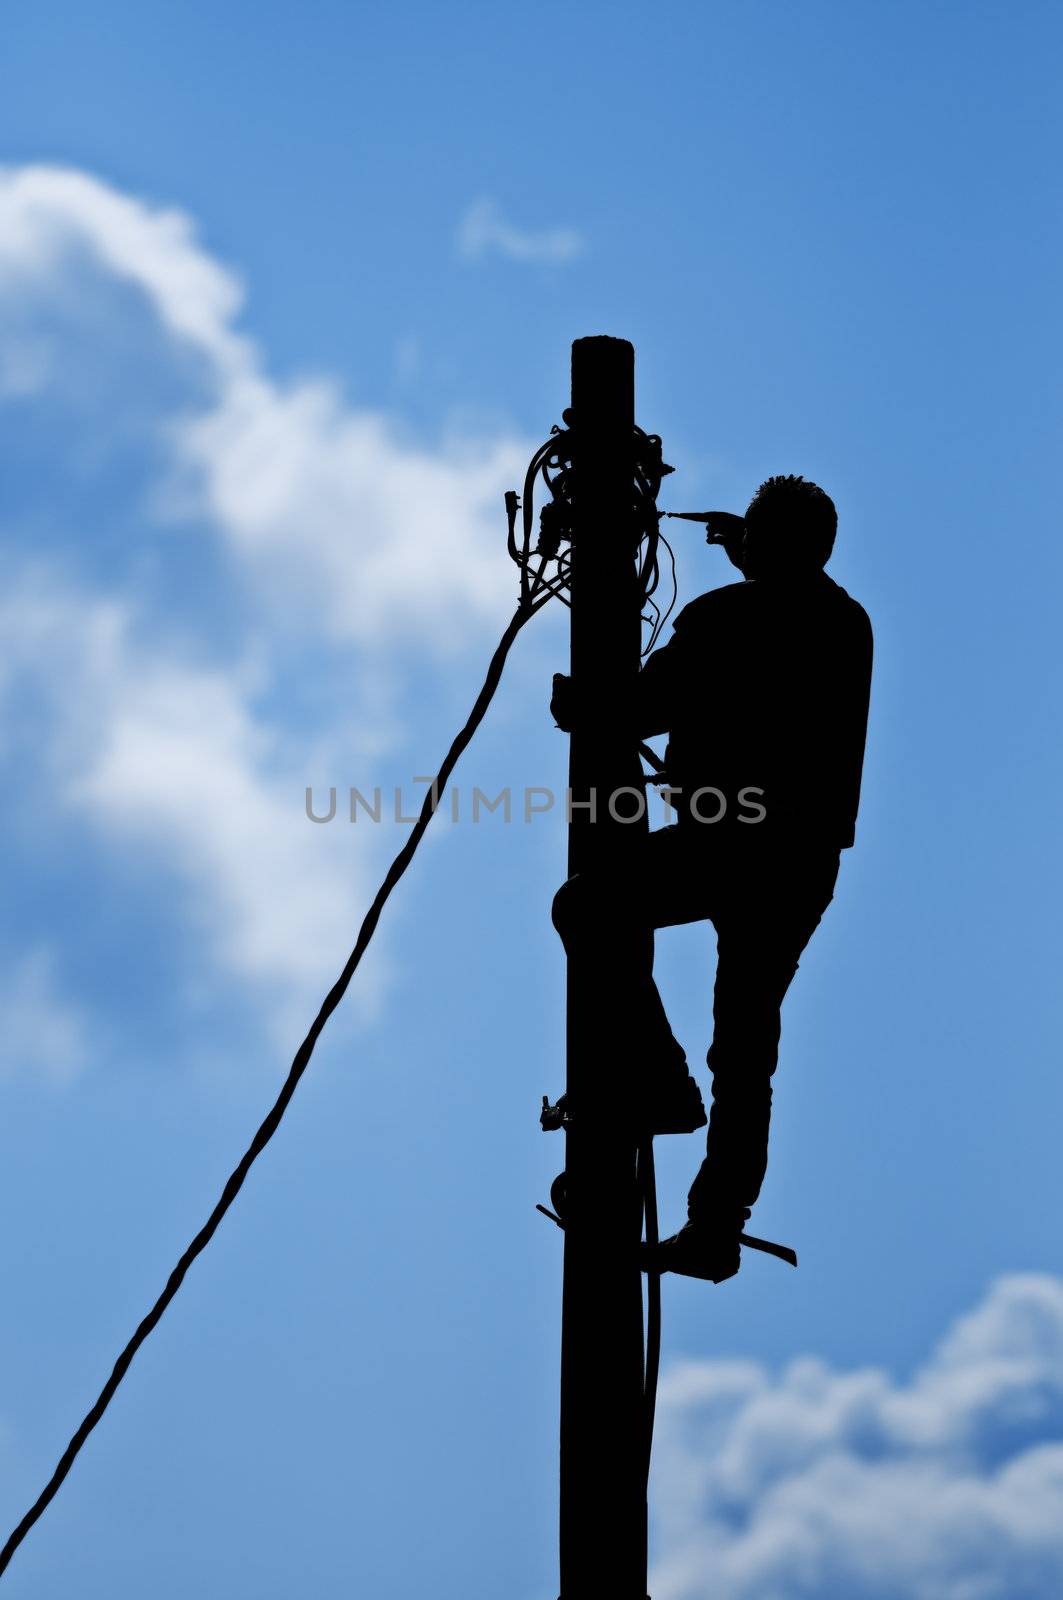 Silhouette of the man repairing wires on the pole